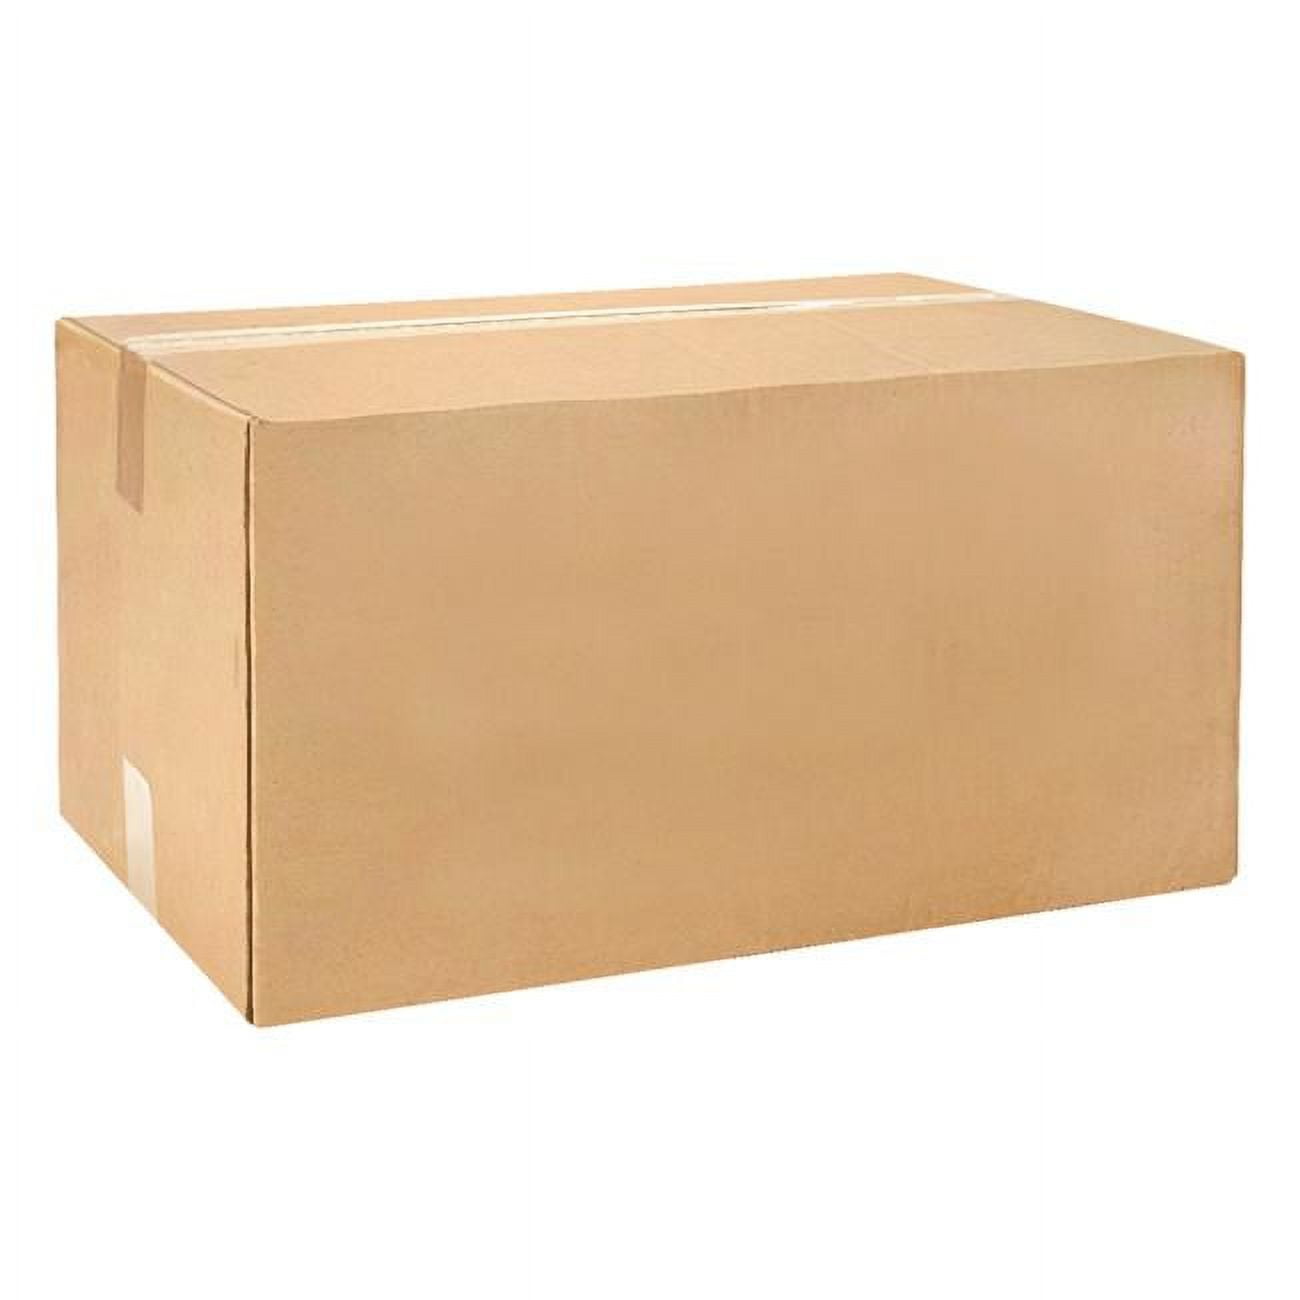 Picture of Boxes on Wheels 9330945 Cardboard Moving Box - 12 x 12 x 16 in.&#44; Pack of 10